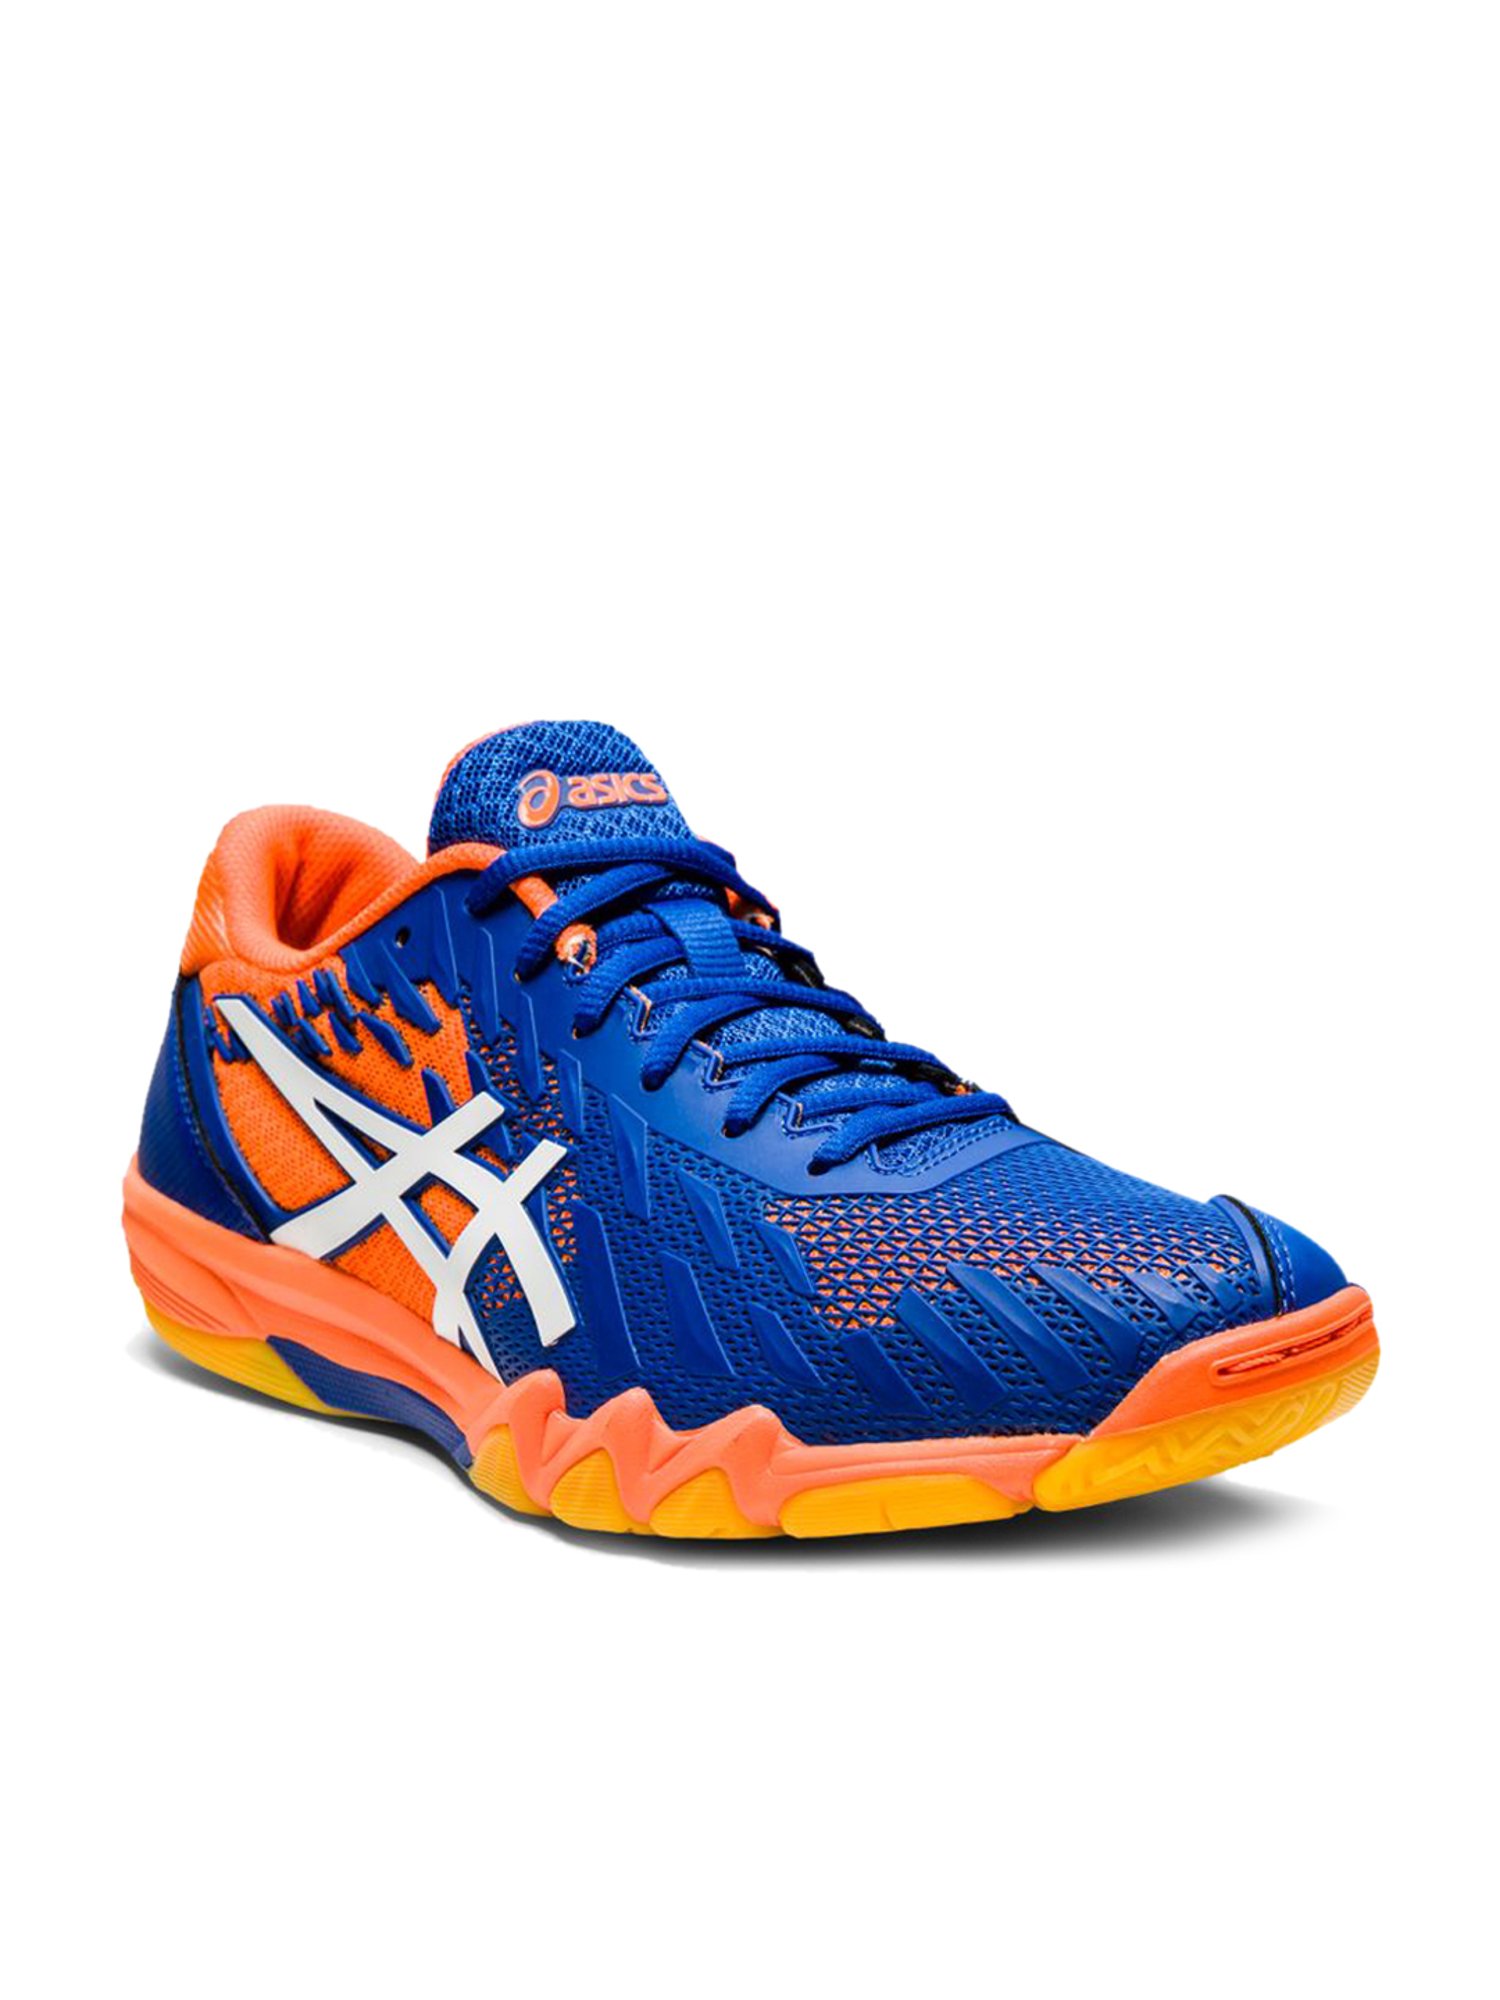 Buy Asics Attack Bladelyte 4 Blue Indoor Court Shoes for at Price @ CLiQ